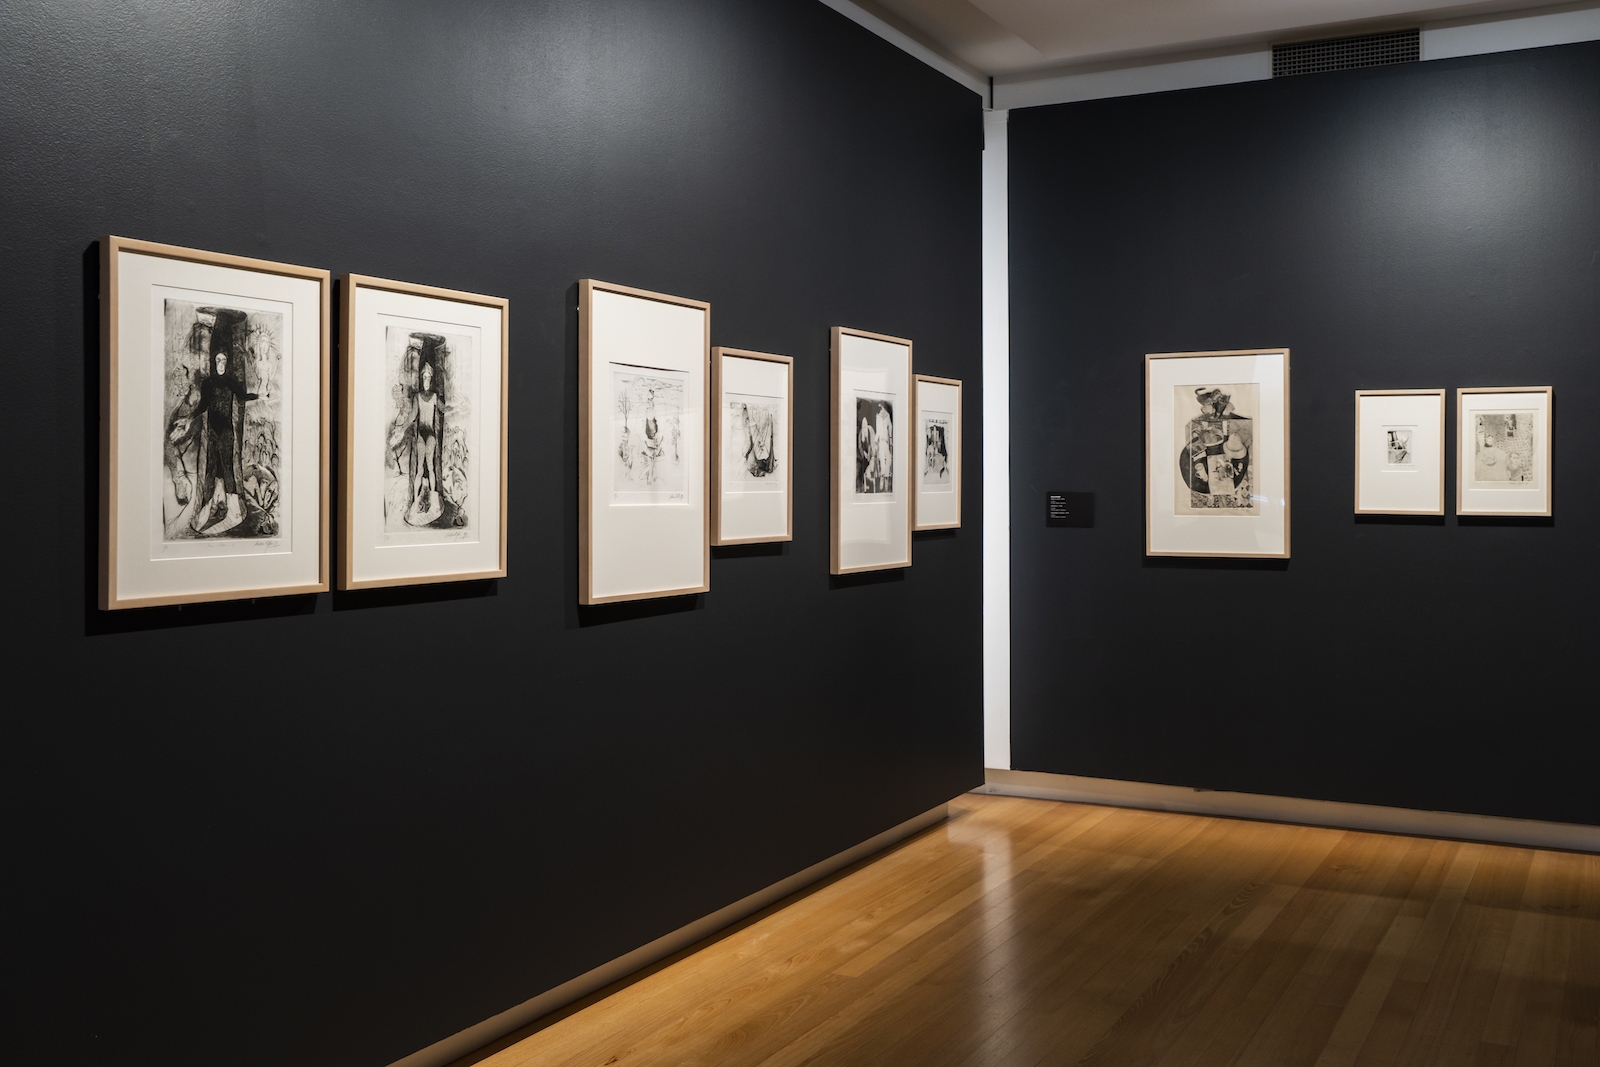 Black and white etchings framed in natural timber are installed on gallery walls painted black.